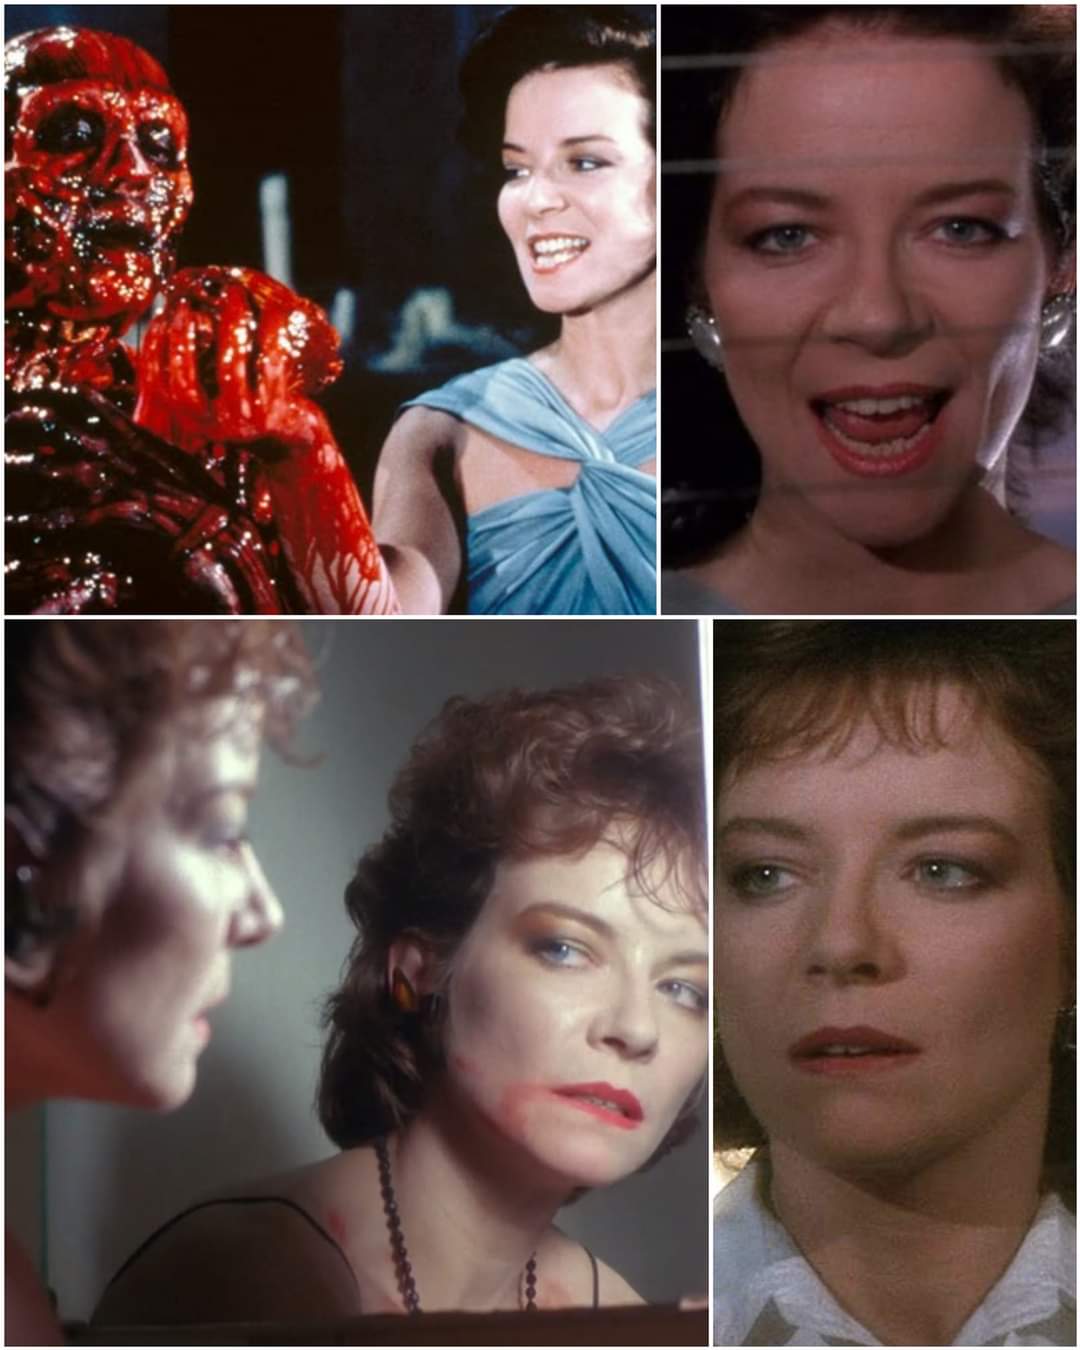 Happy (belated) 66th birthday to Clare Higgins!

(Pic collage by Art of Horror) 